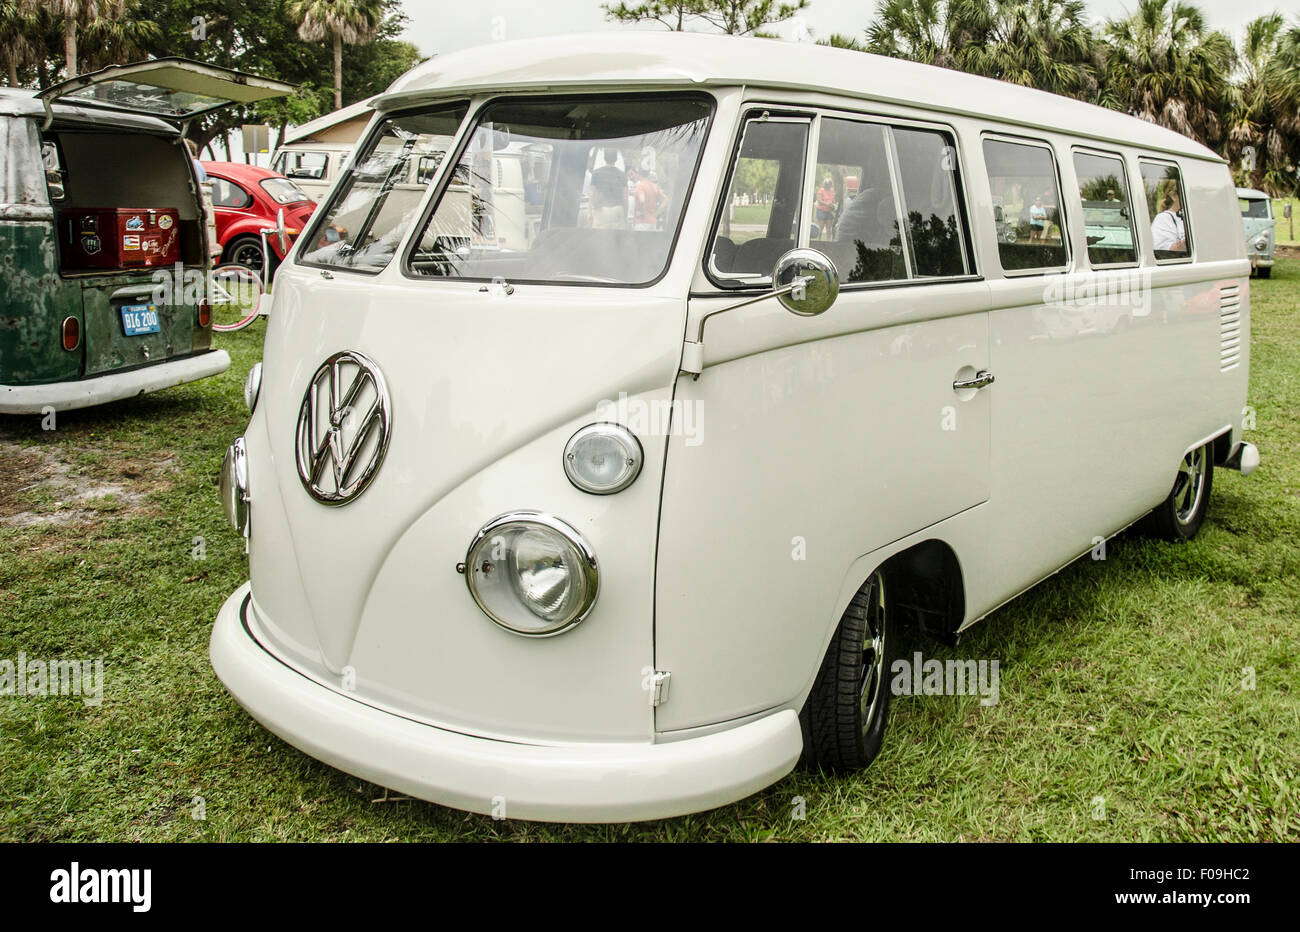 Volkswagens at VW's over the Skyway car show. Stock Photo